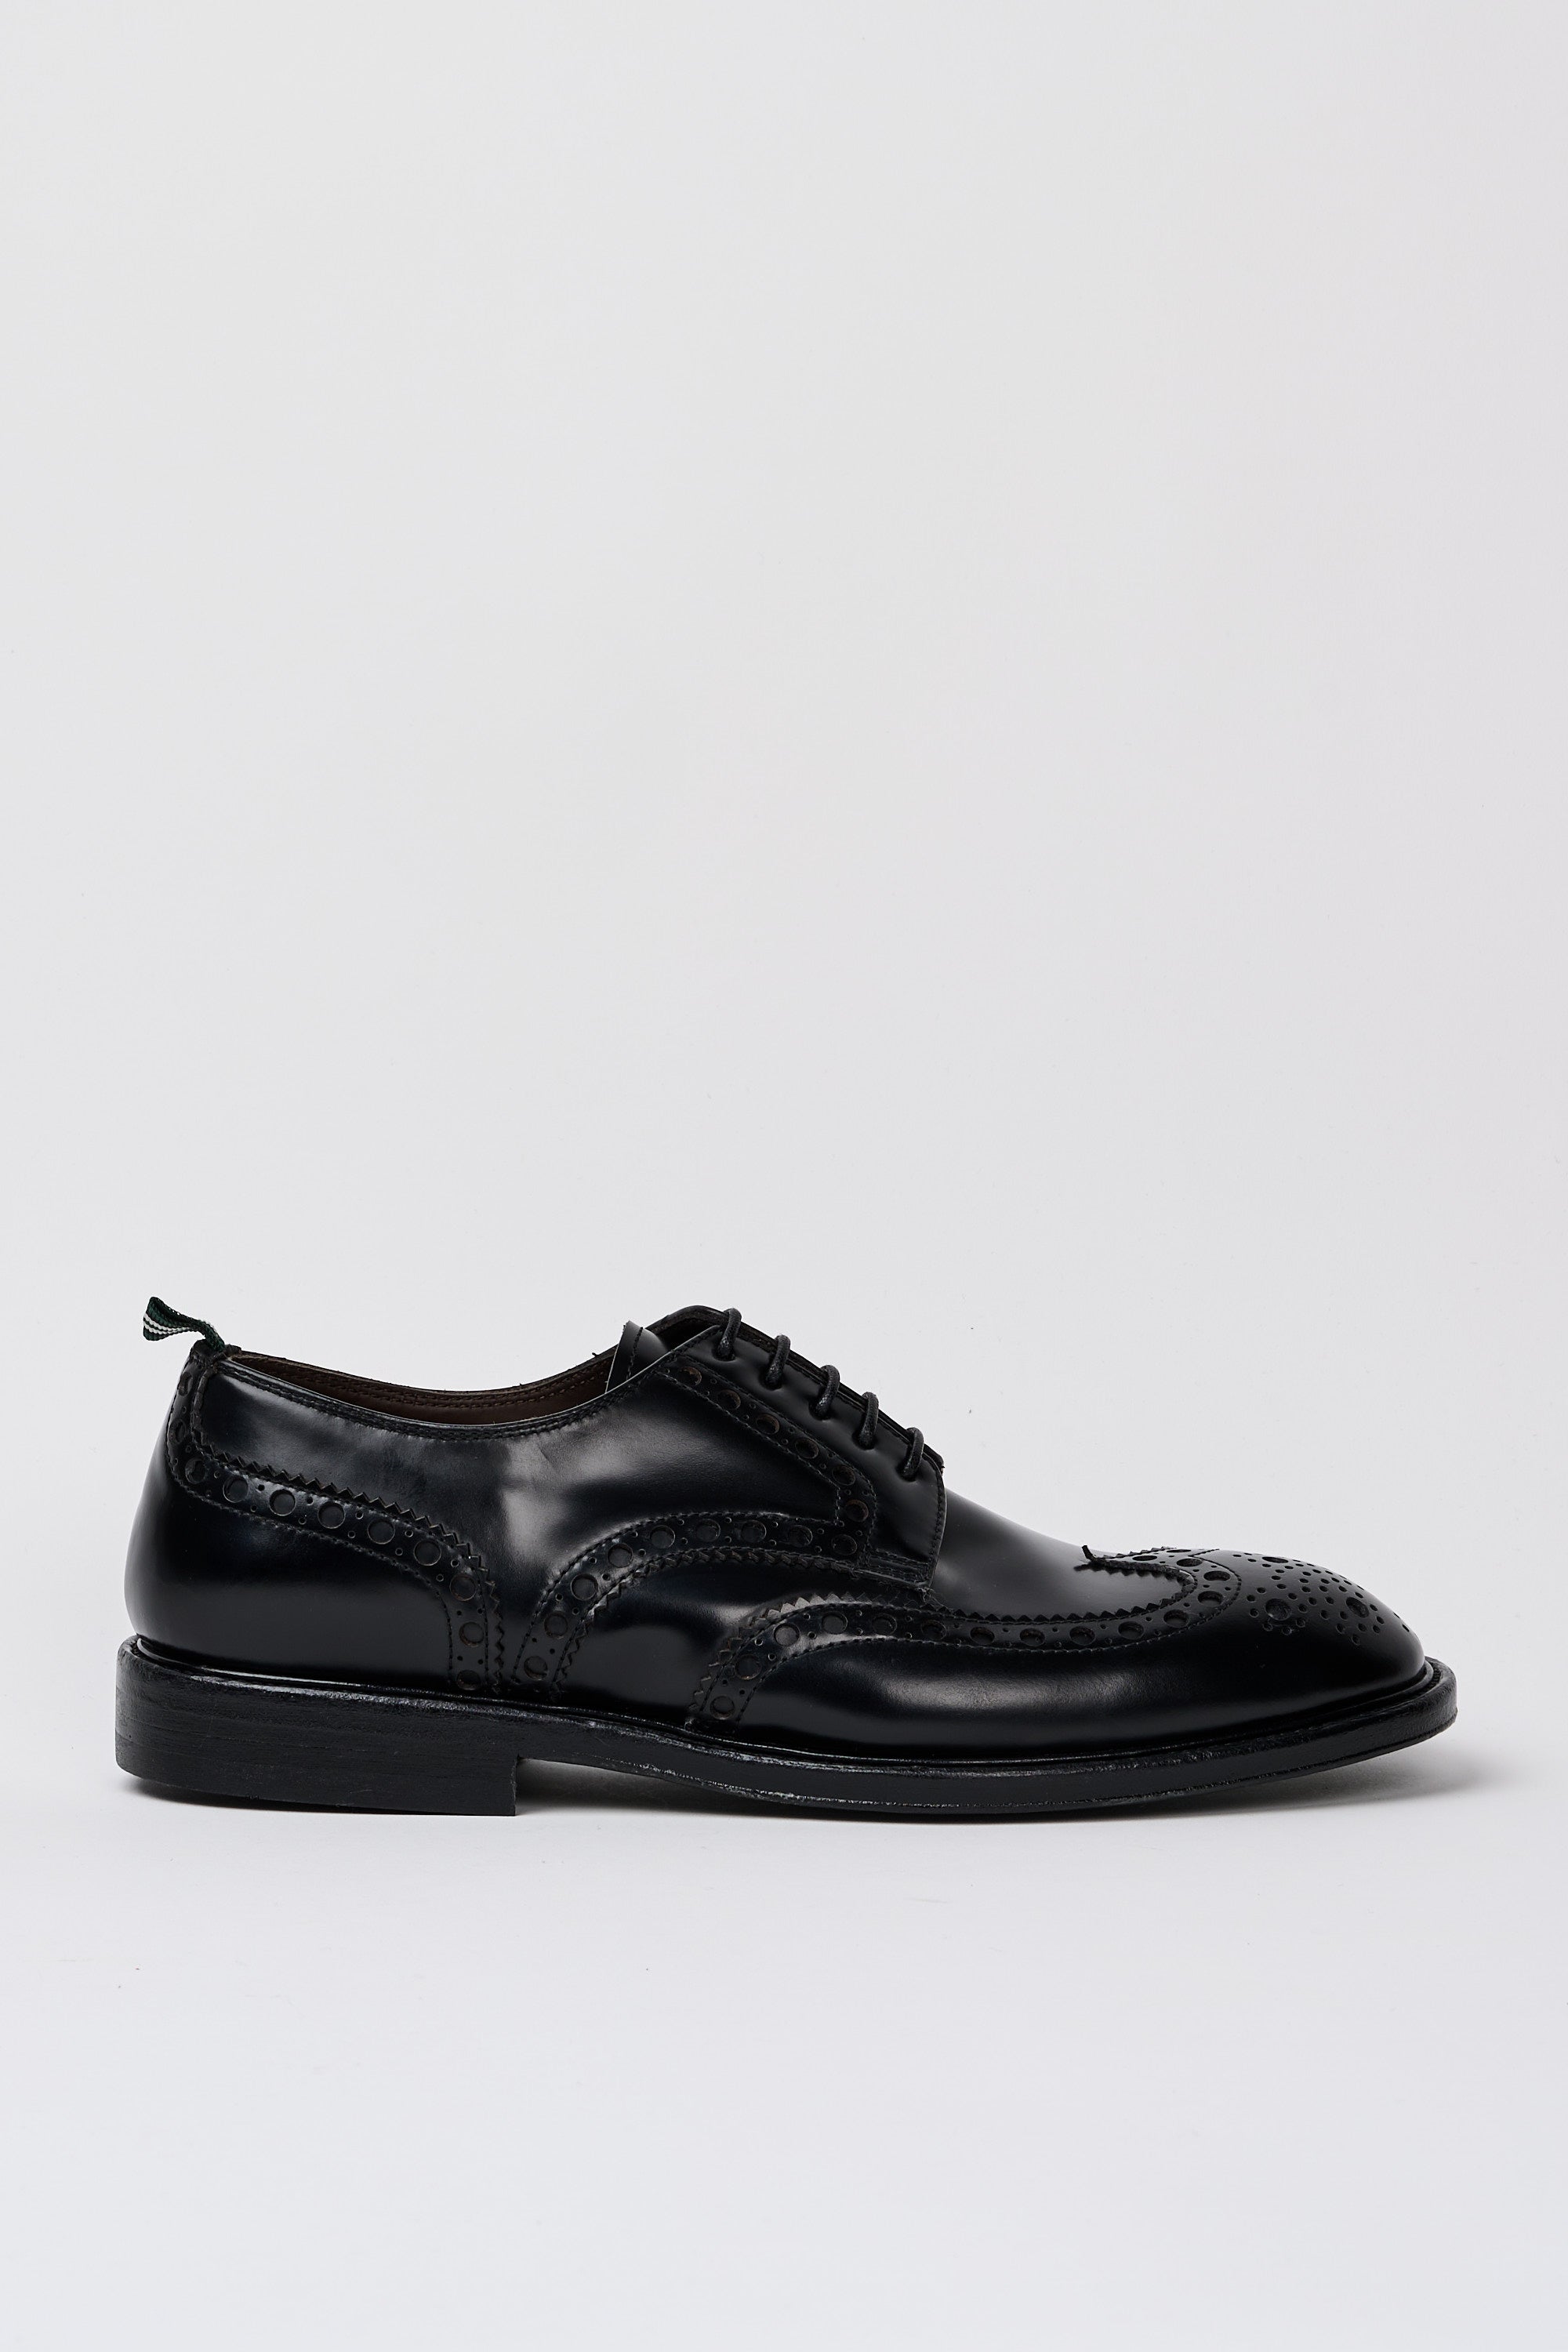 Green George Brogue Perforated Black Leather Shoe-1